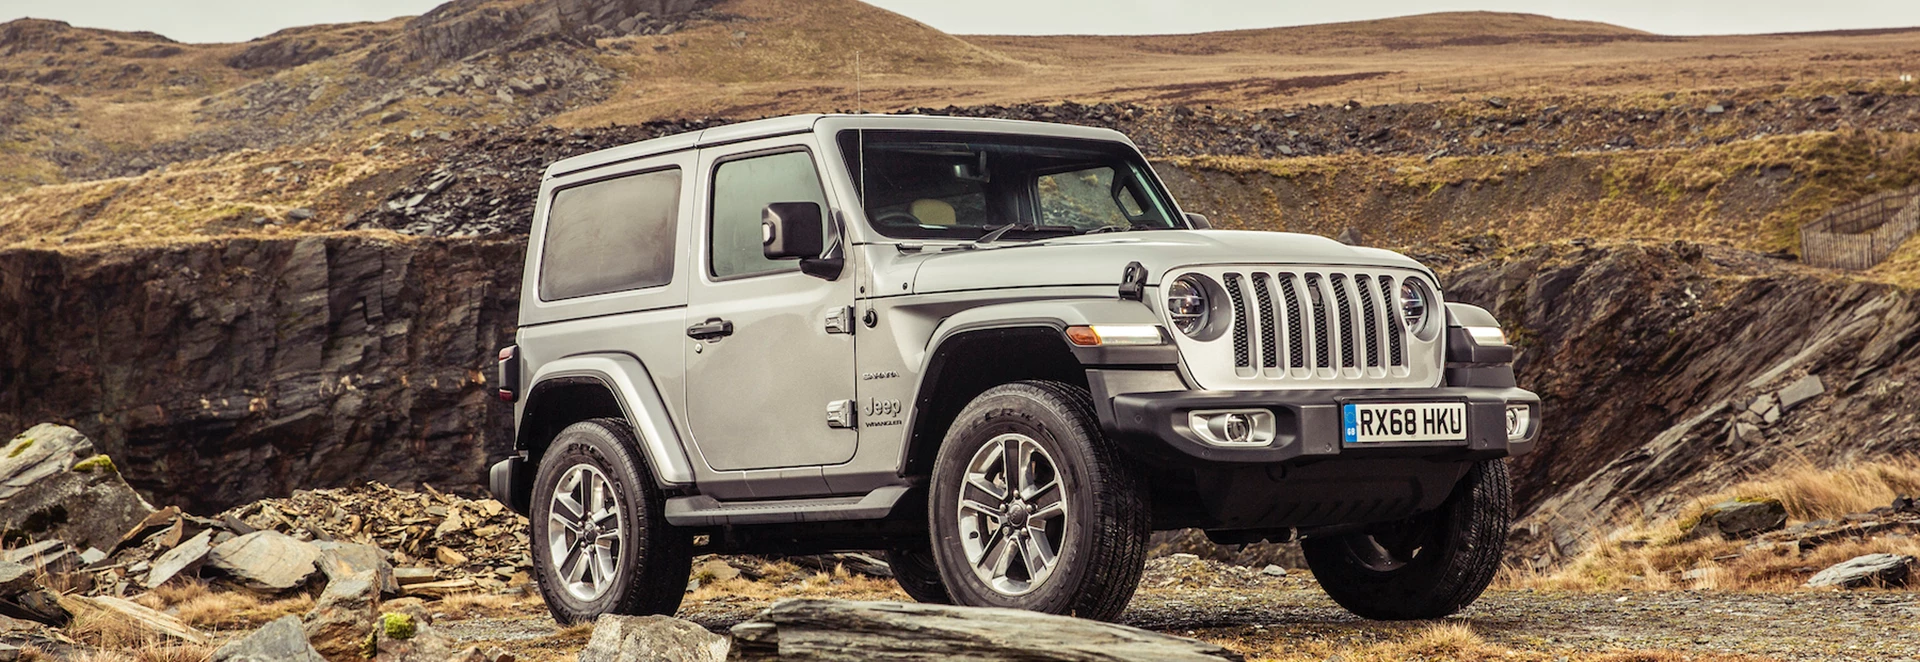 Buyer’s guide to the Jeep Wrangler